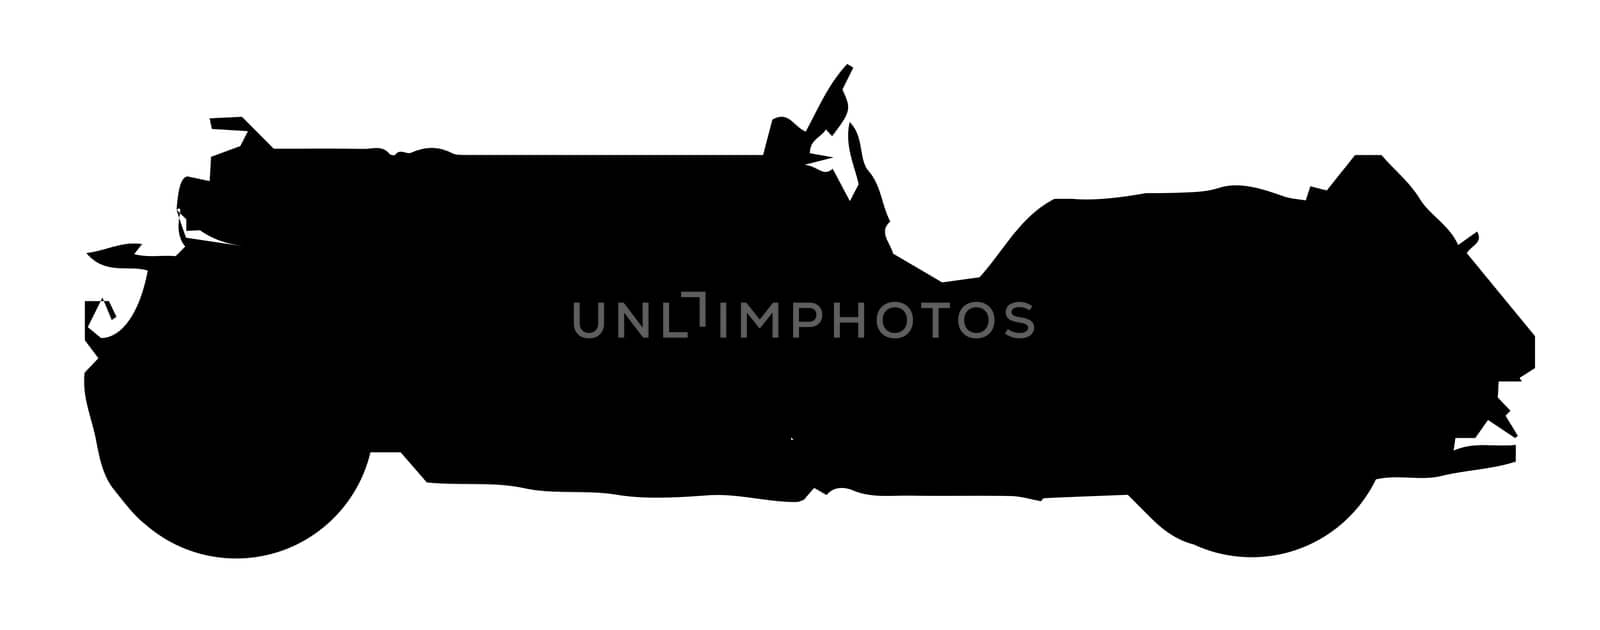 A typical old fashioned open top fast sport car in silhouette over a white background